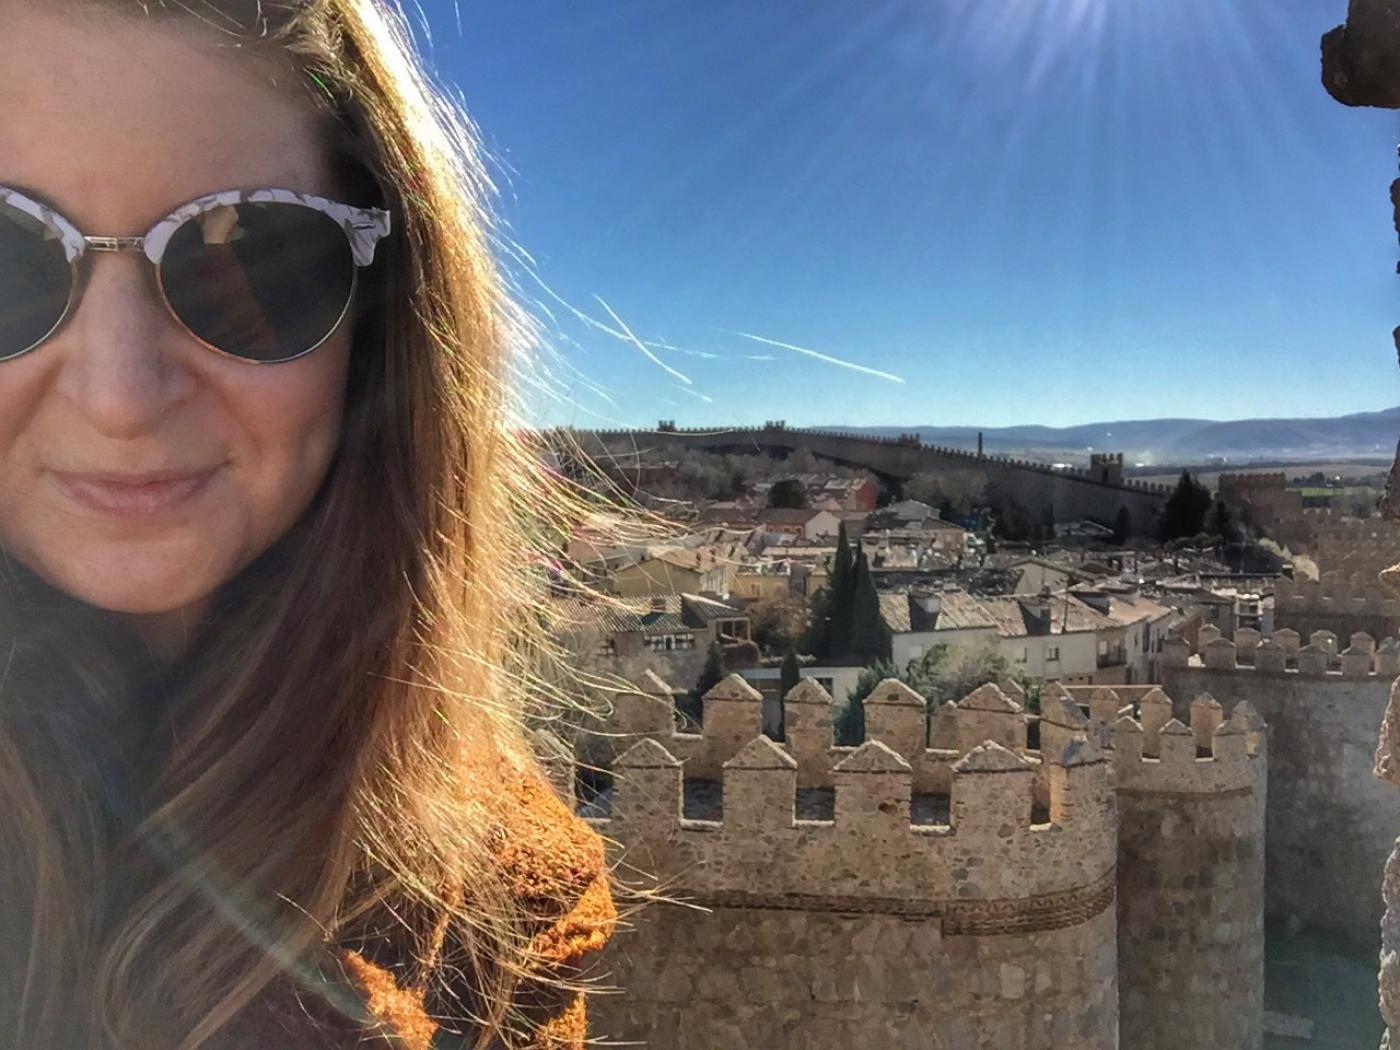 Andrea enjoying a day trip to the walled city of Avila.